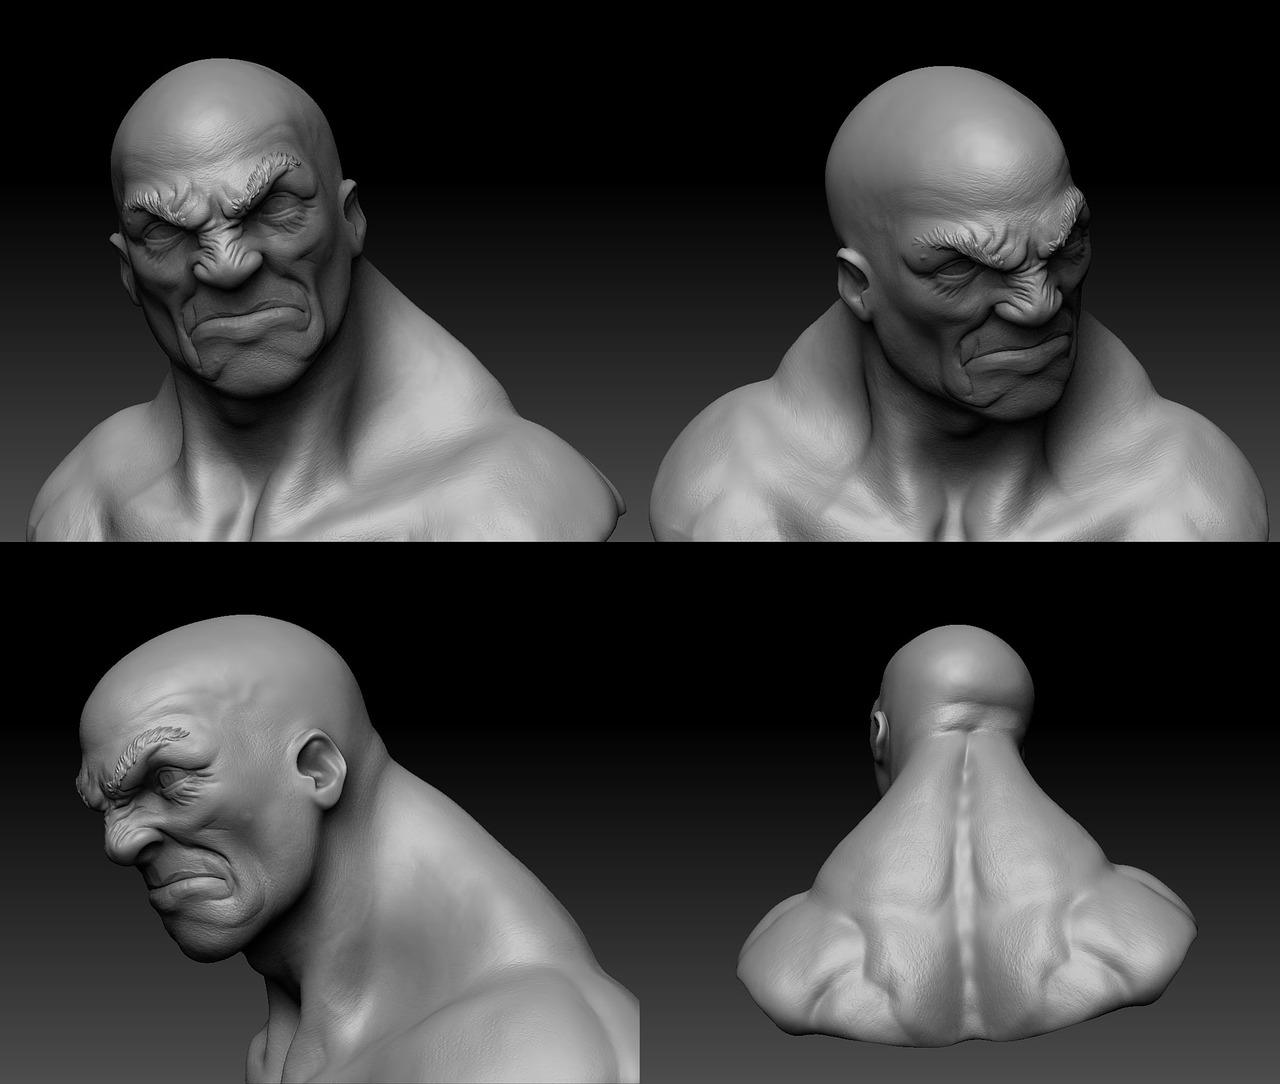 move is too sensitive in zbrush